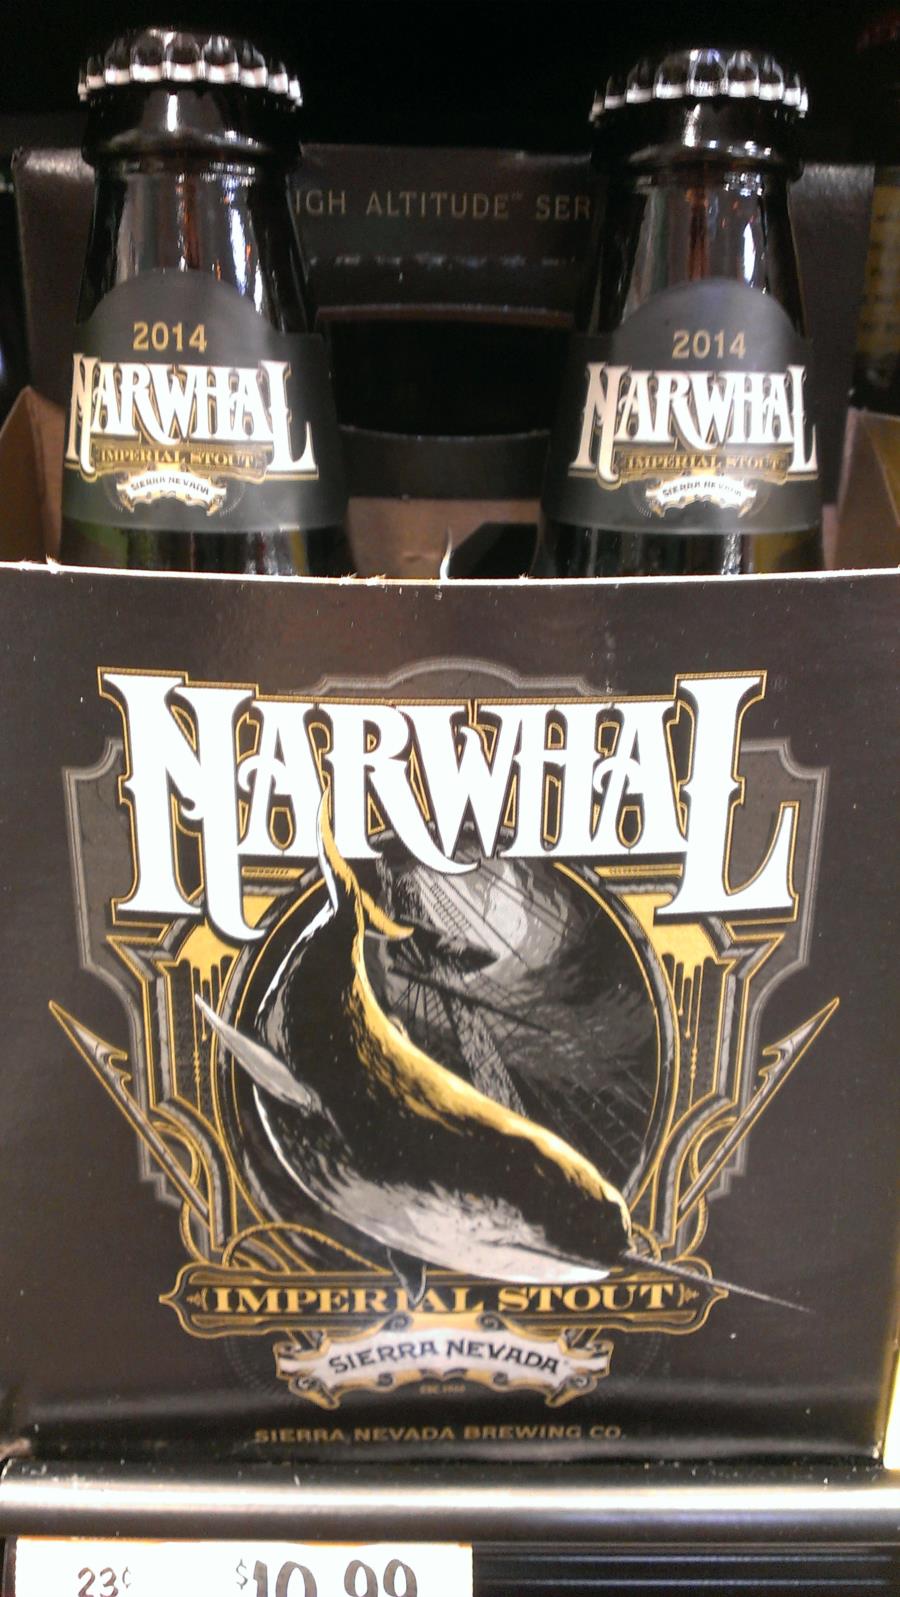 Anyone try Narwhal beer?